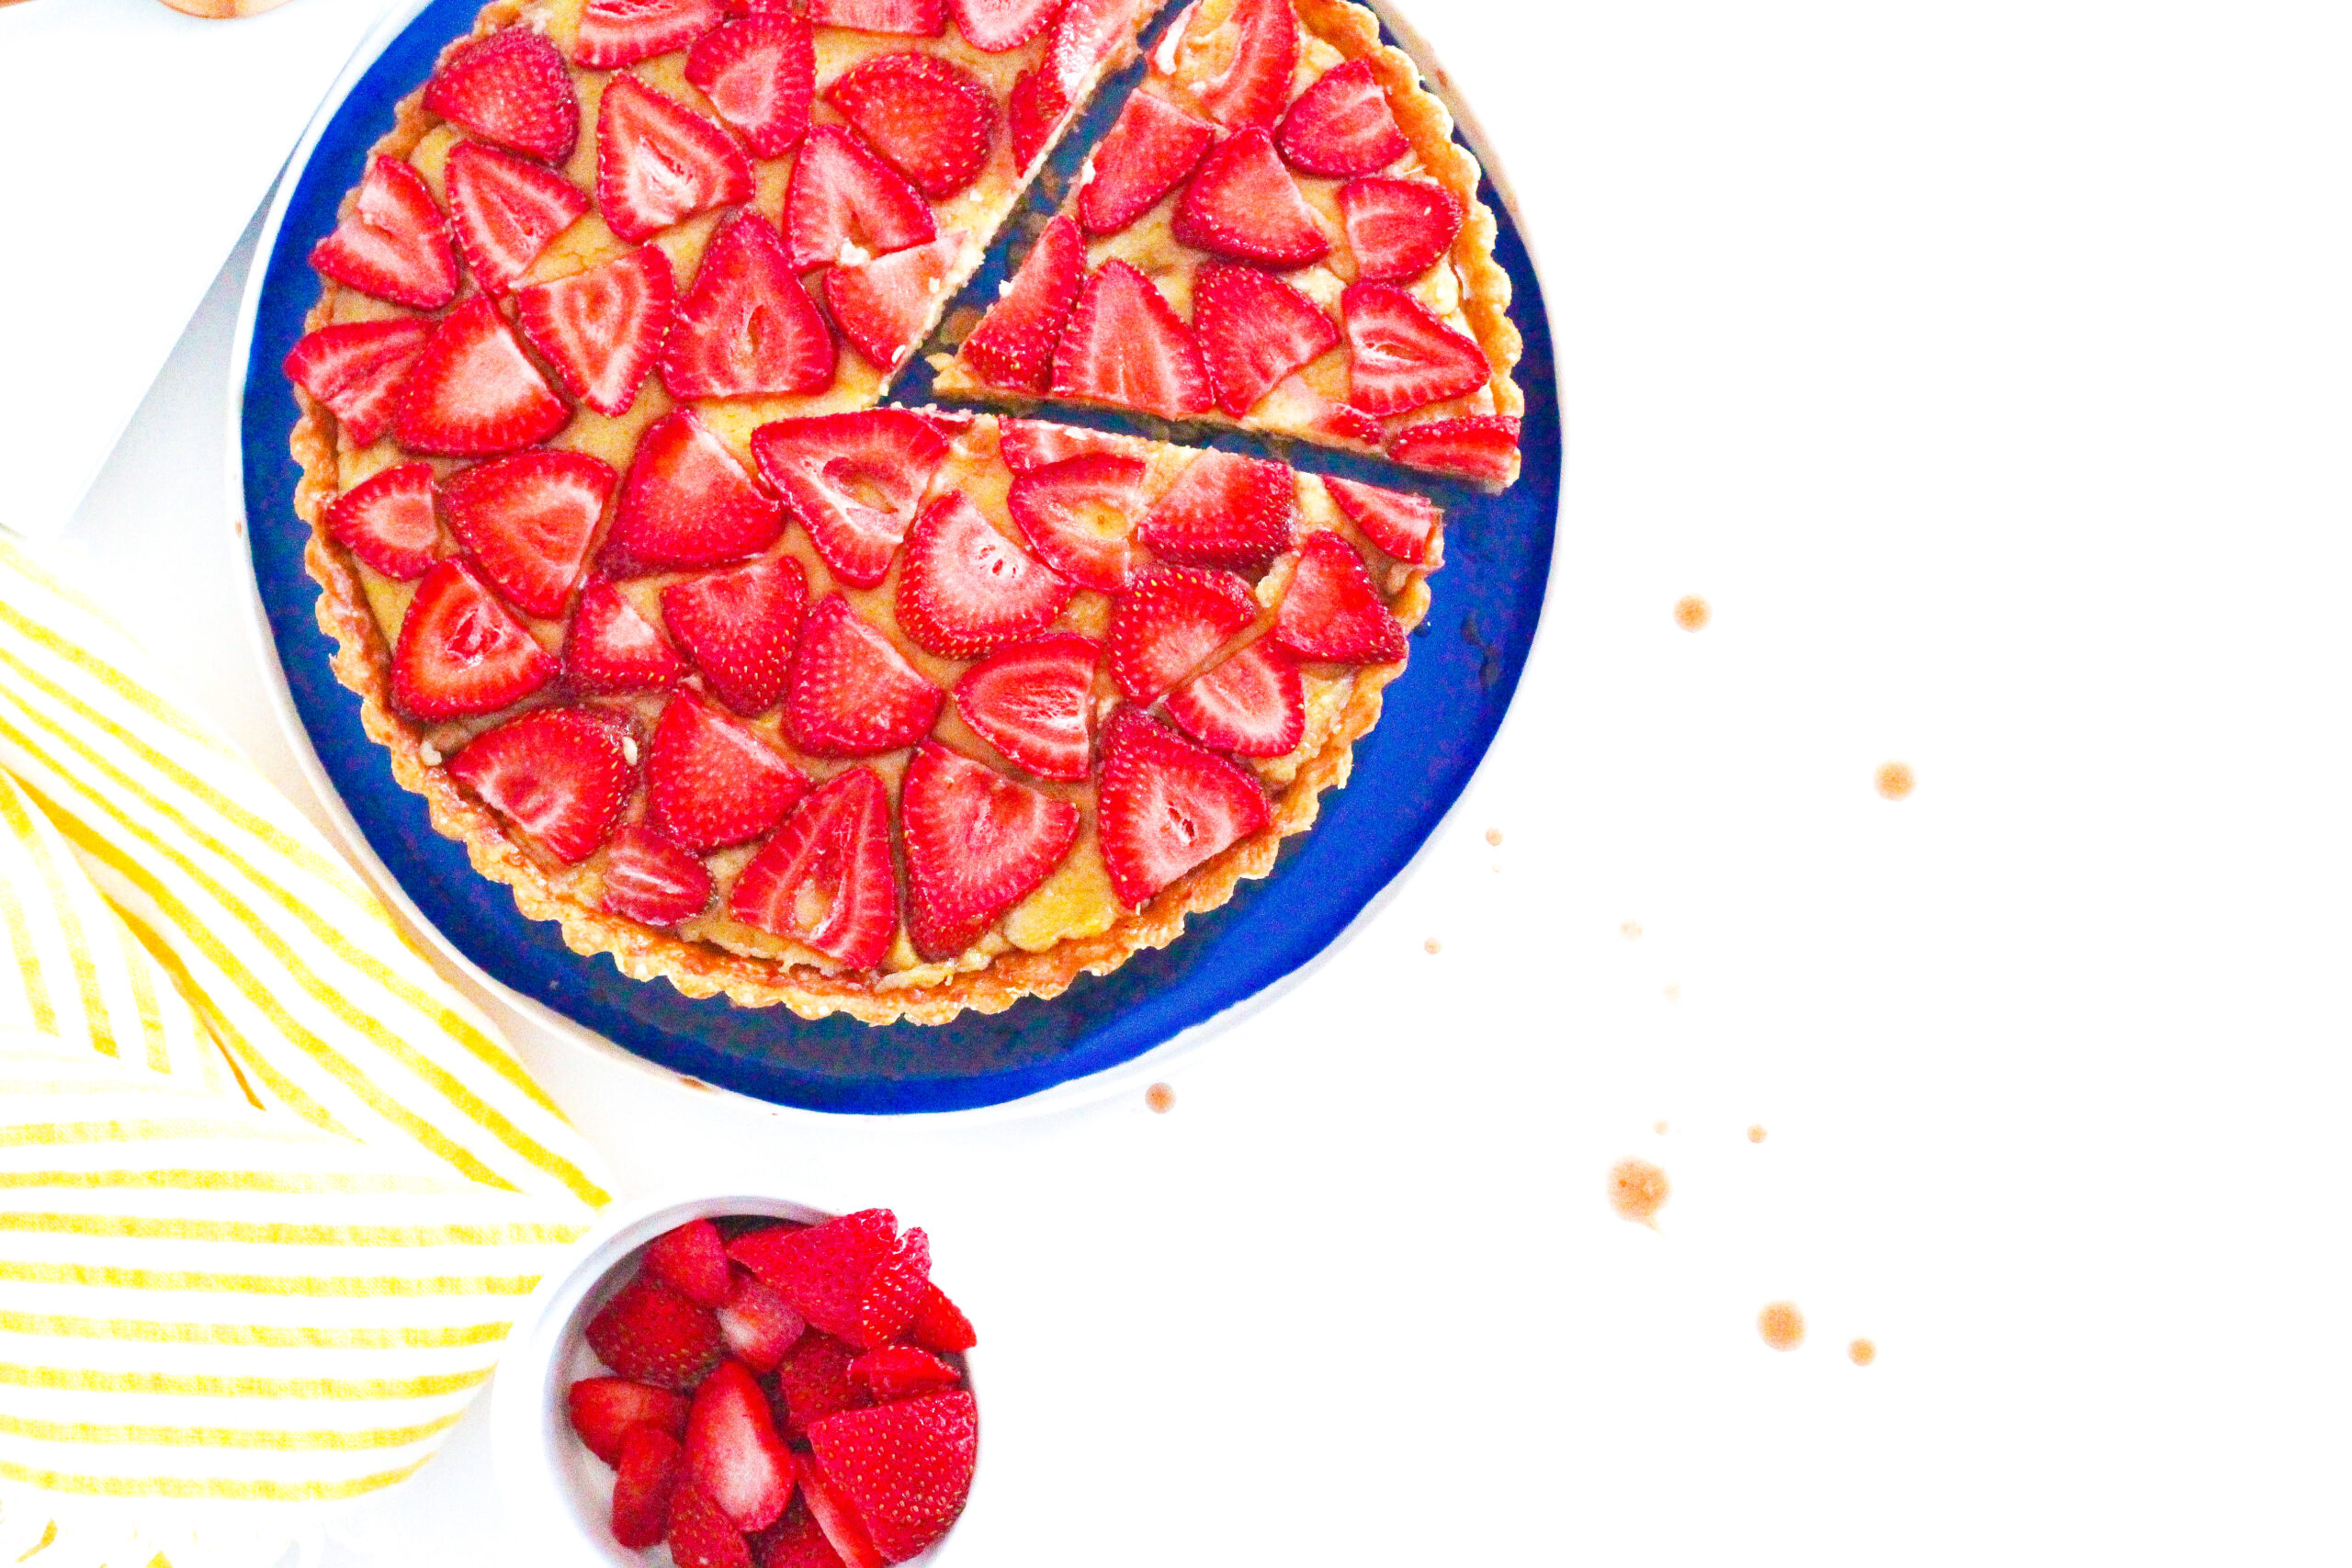 A slice slightly shifted out of a balsamic strawberry and basil tart with a bowl of strawberries below the tart and a yellow striped napkin to the left of the tart. To the right of the frame are splatters of balsamic on a white surface.